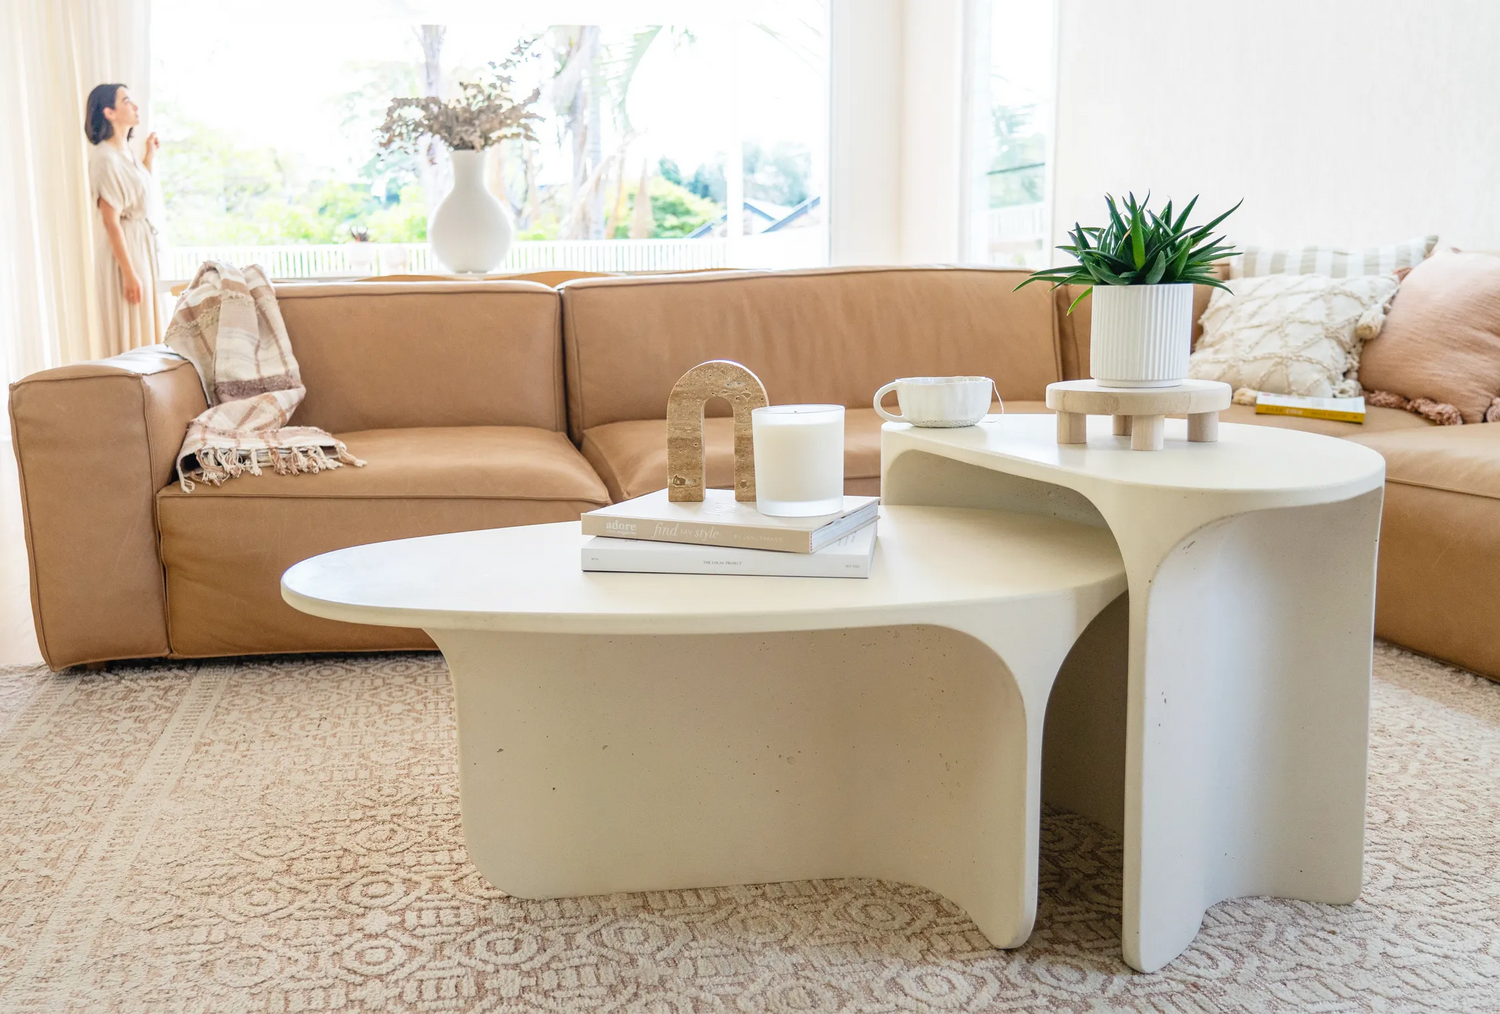 The Riviera Concrete Coffee Table and Adria Concrete Side Table in front of a tan couch in a bright modern living room.